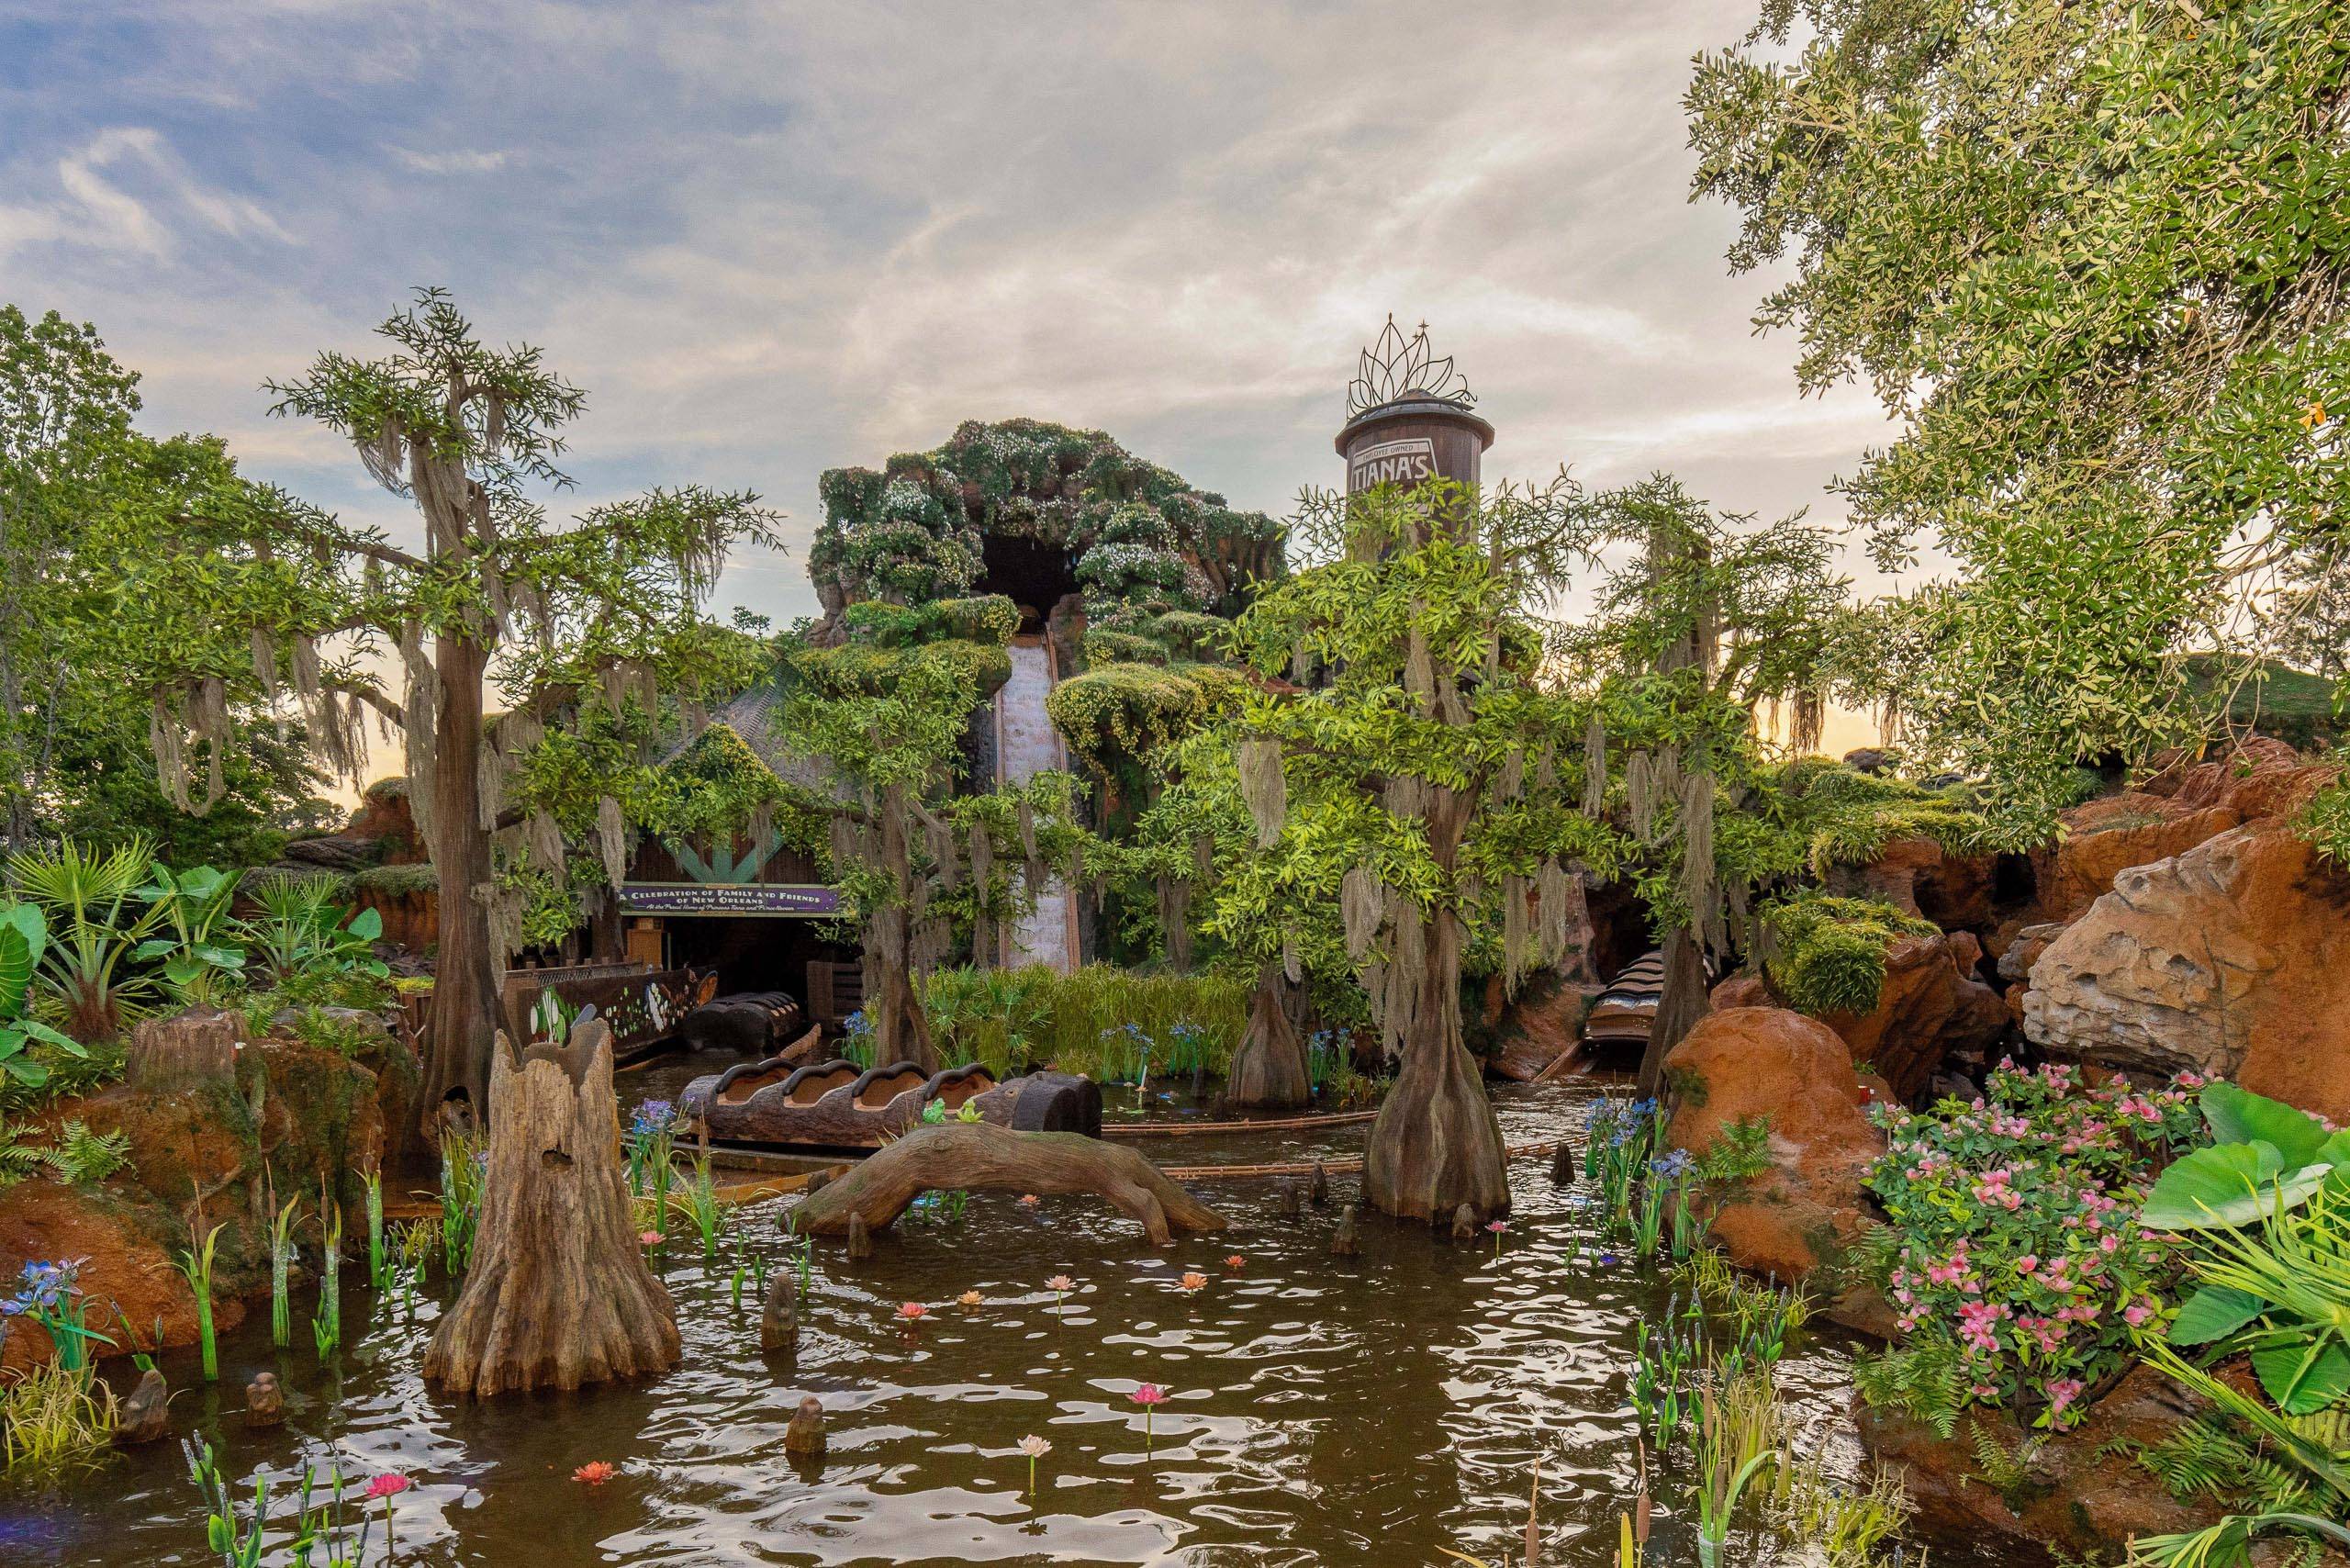 Tiana's Bayou Adventure previews are scheduled for June 13, 14, 16, 17, 18, and 20